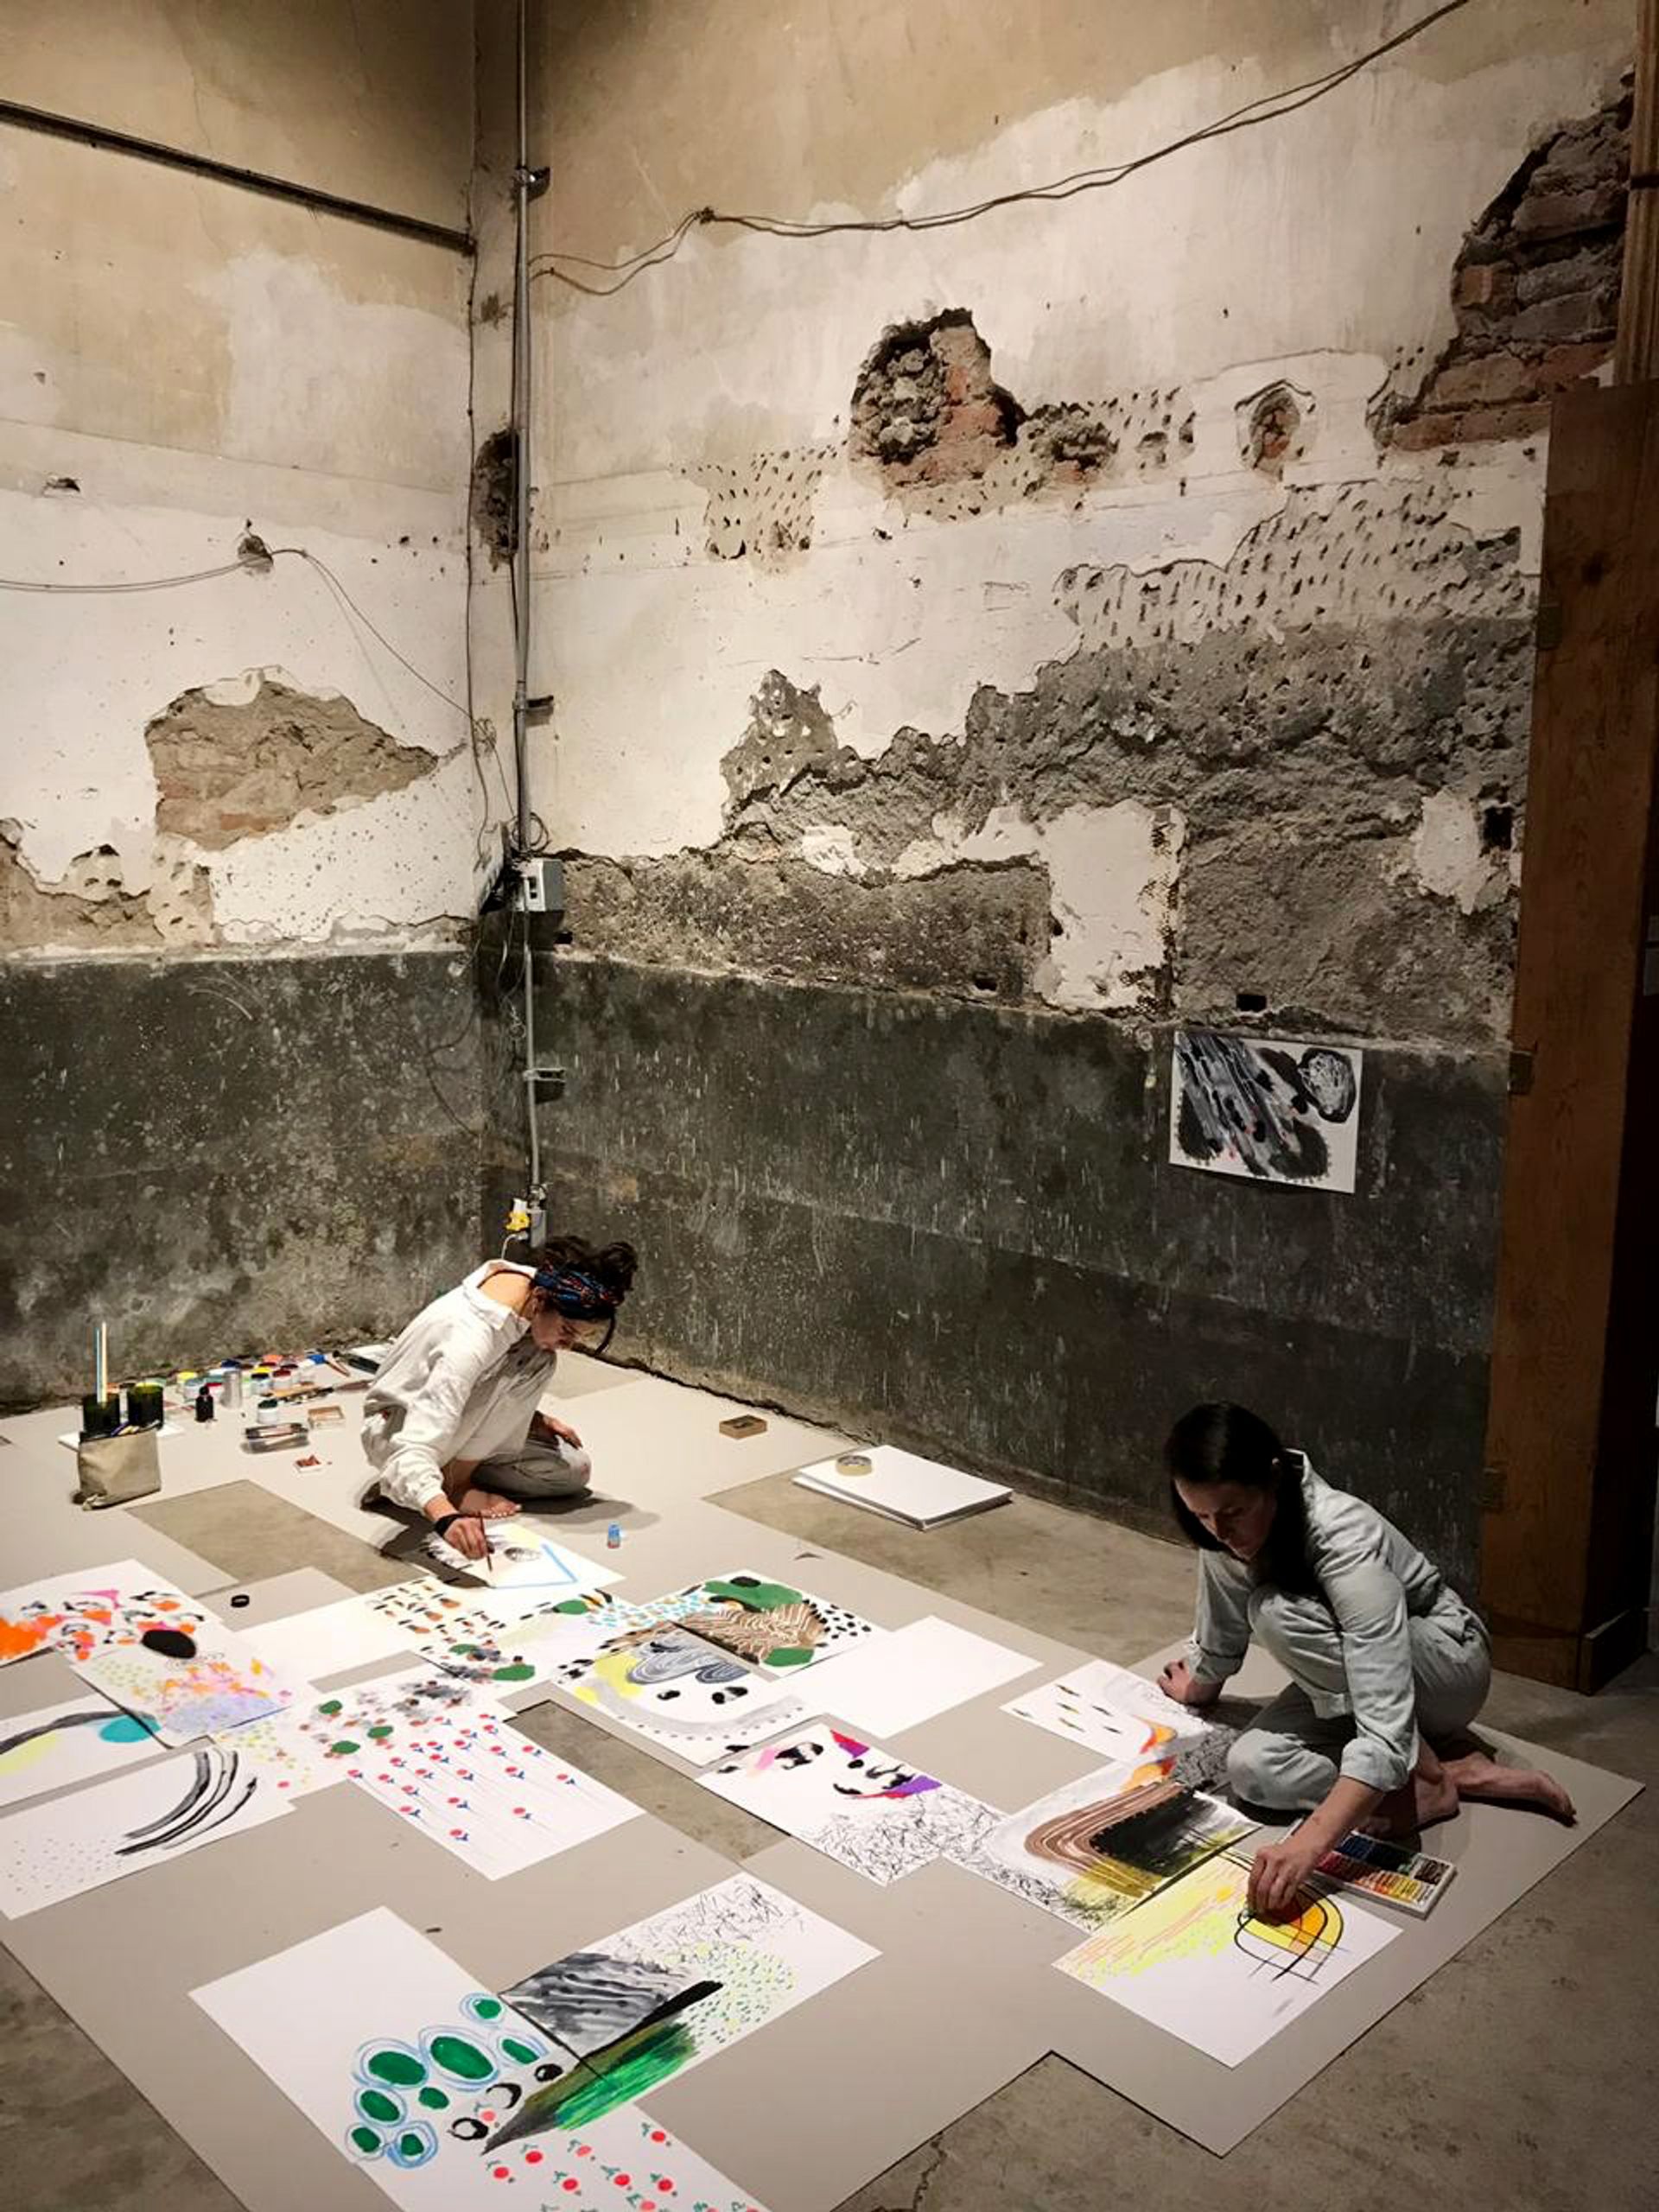 A rendering of the performance piece "Band Practice" by Clara Claus and Melissa Godoy. Photo courtesy of Mauricio García and Salón ACME